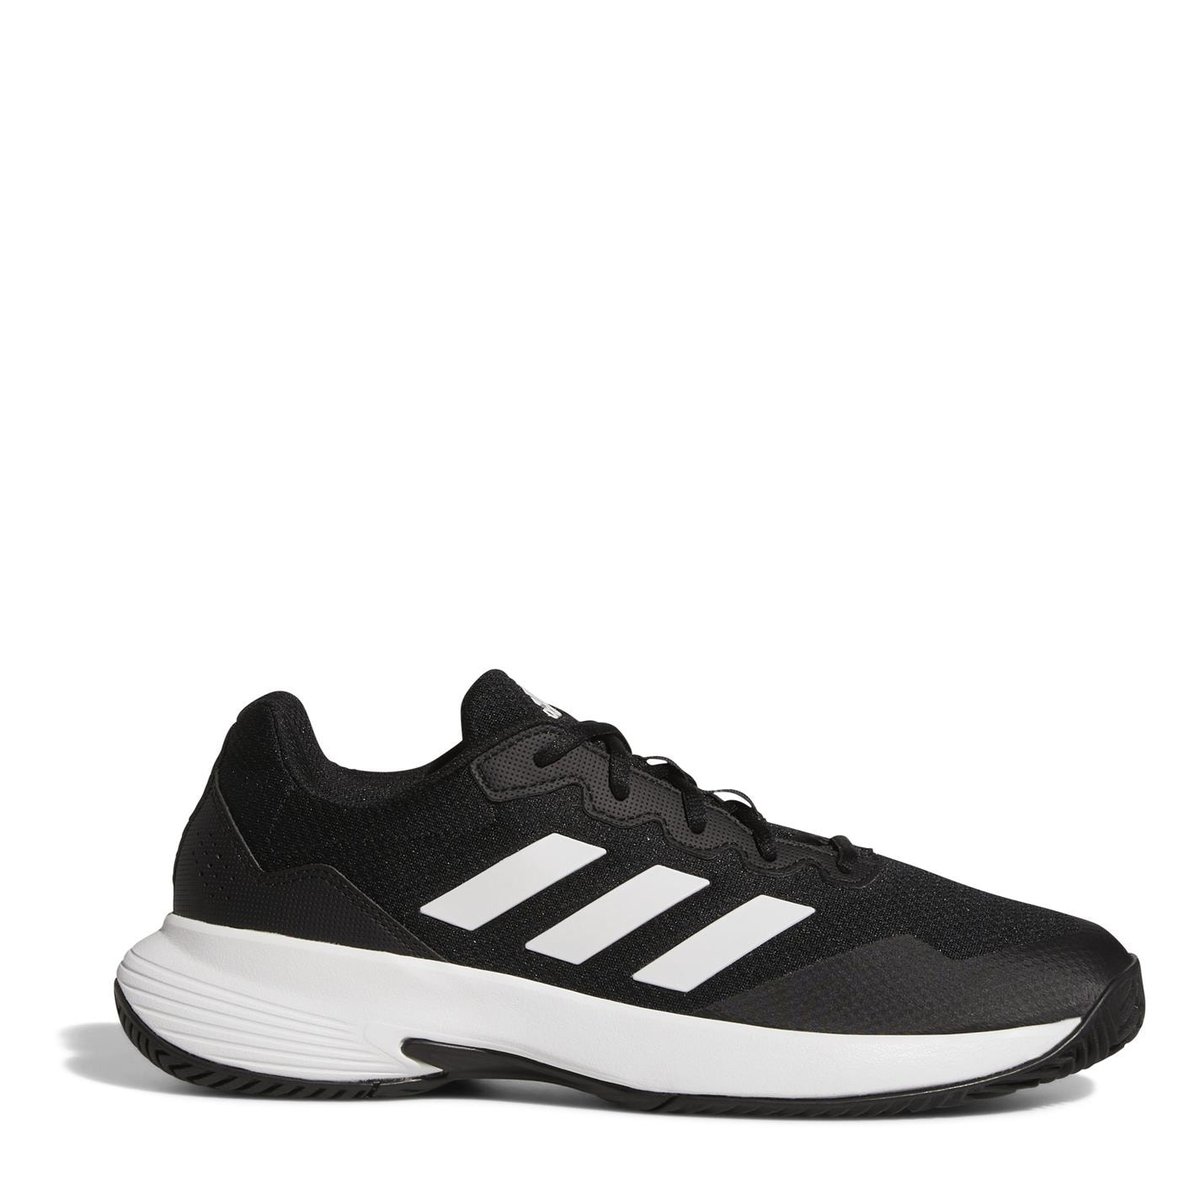 adidas Game Court 2 Mens Tennis Trainers